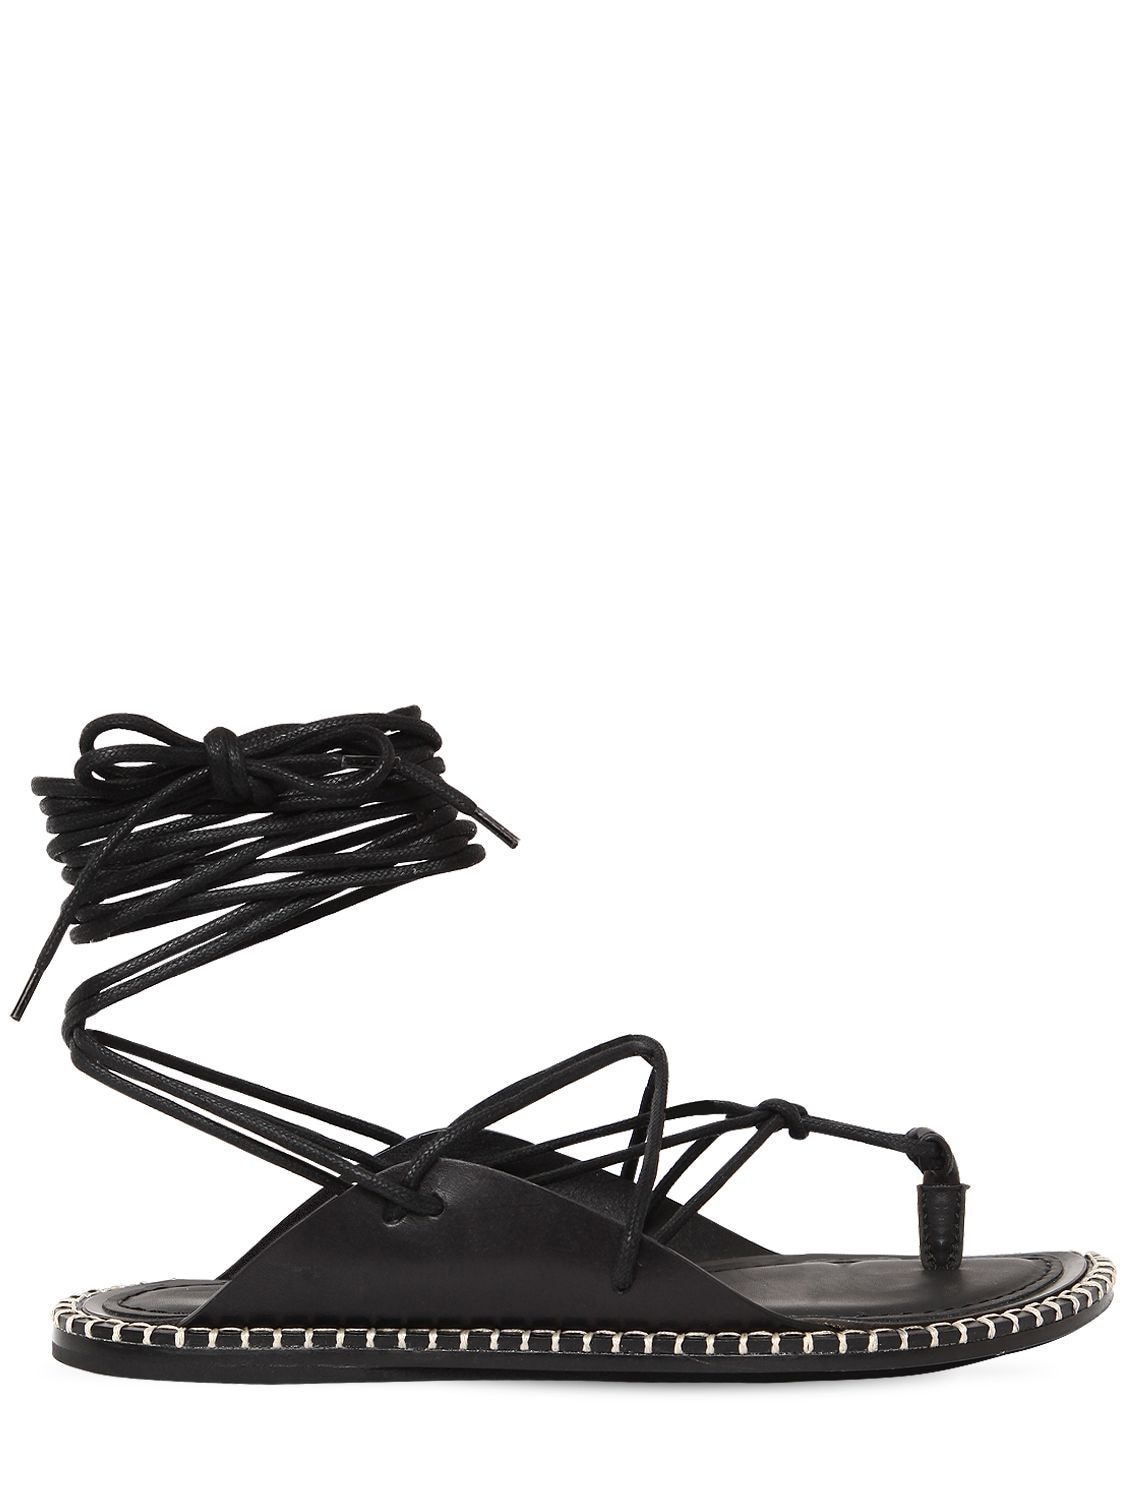 ANN DEMEULEMEESTER 10MM LACE-UP LEATHER SANDALS,69I51K001-QKXBQ0S1